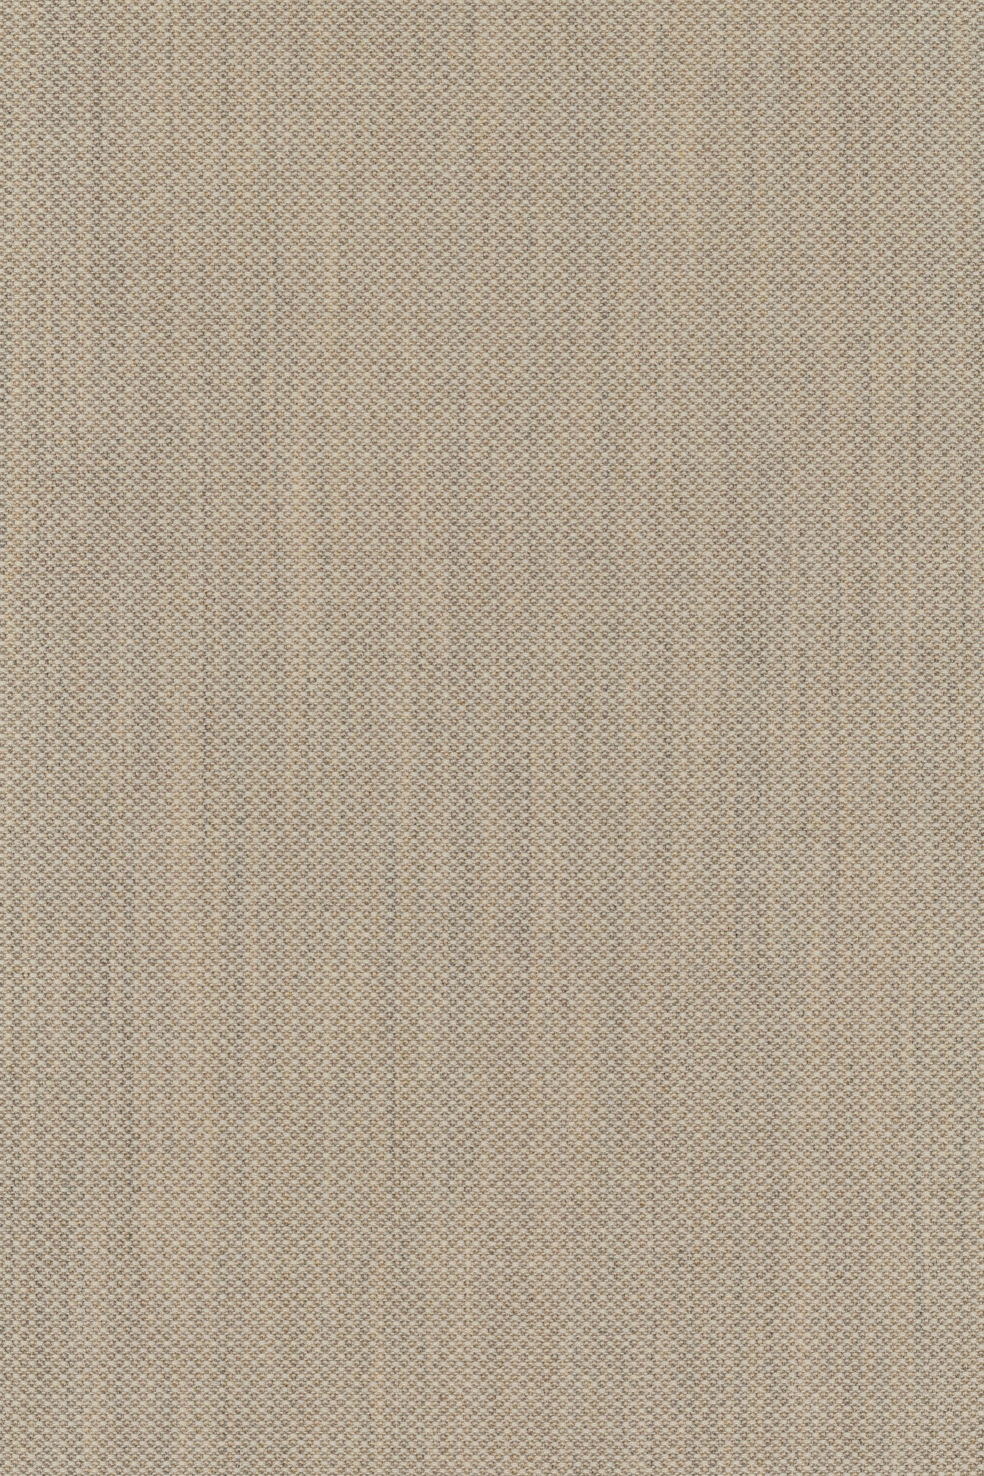 Fabric sample Fiord brown